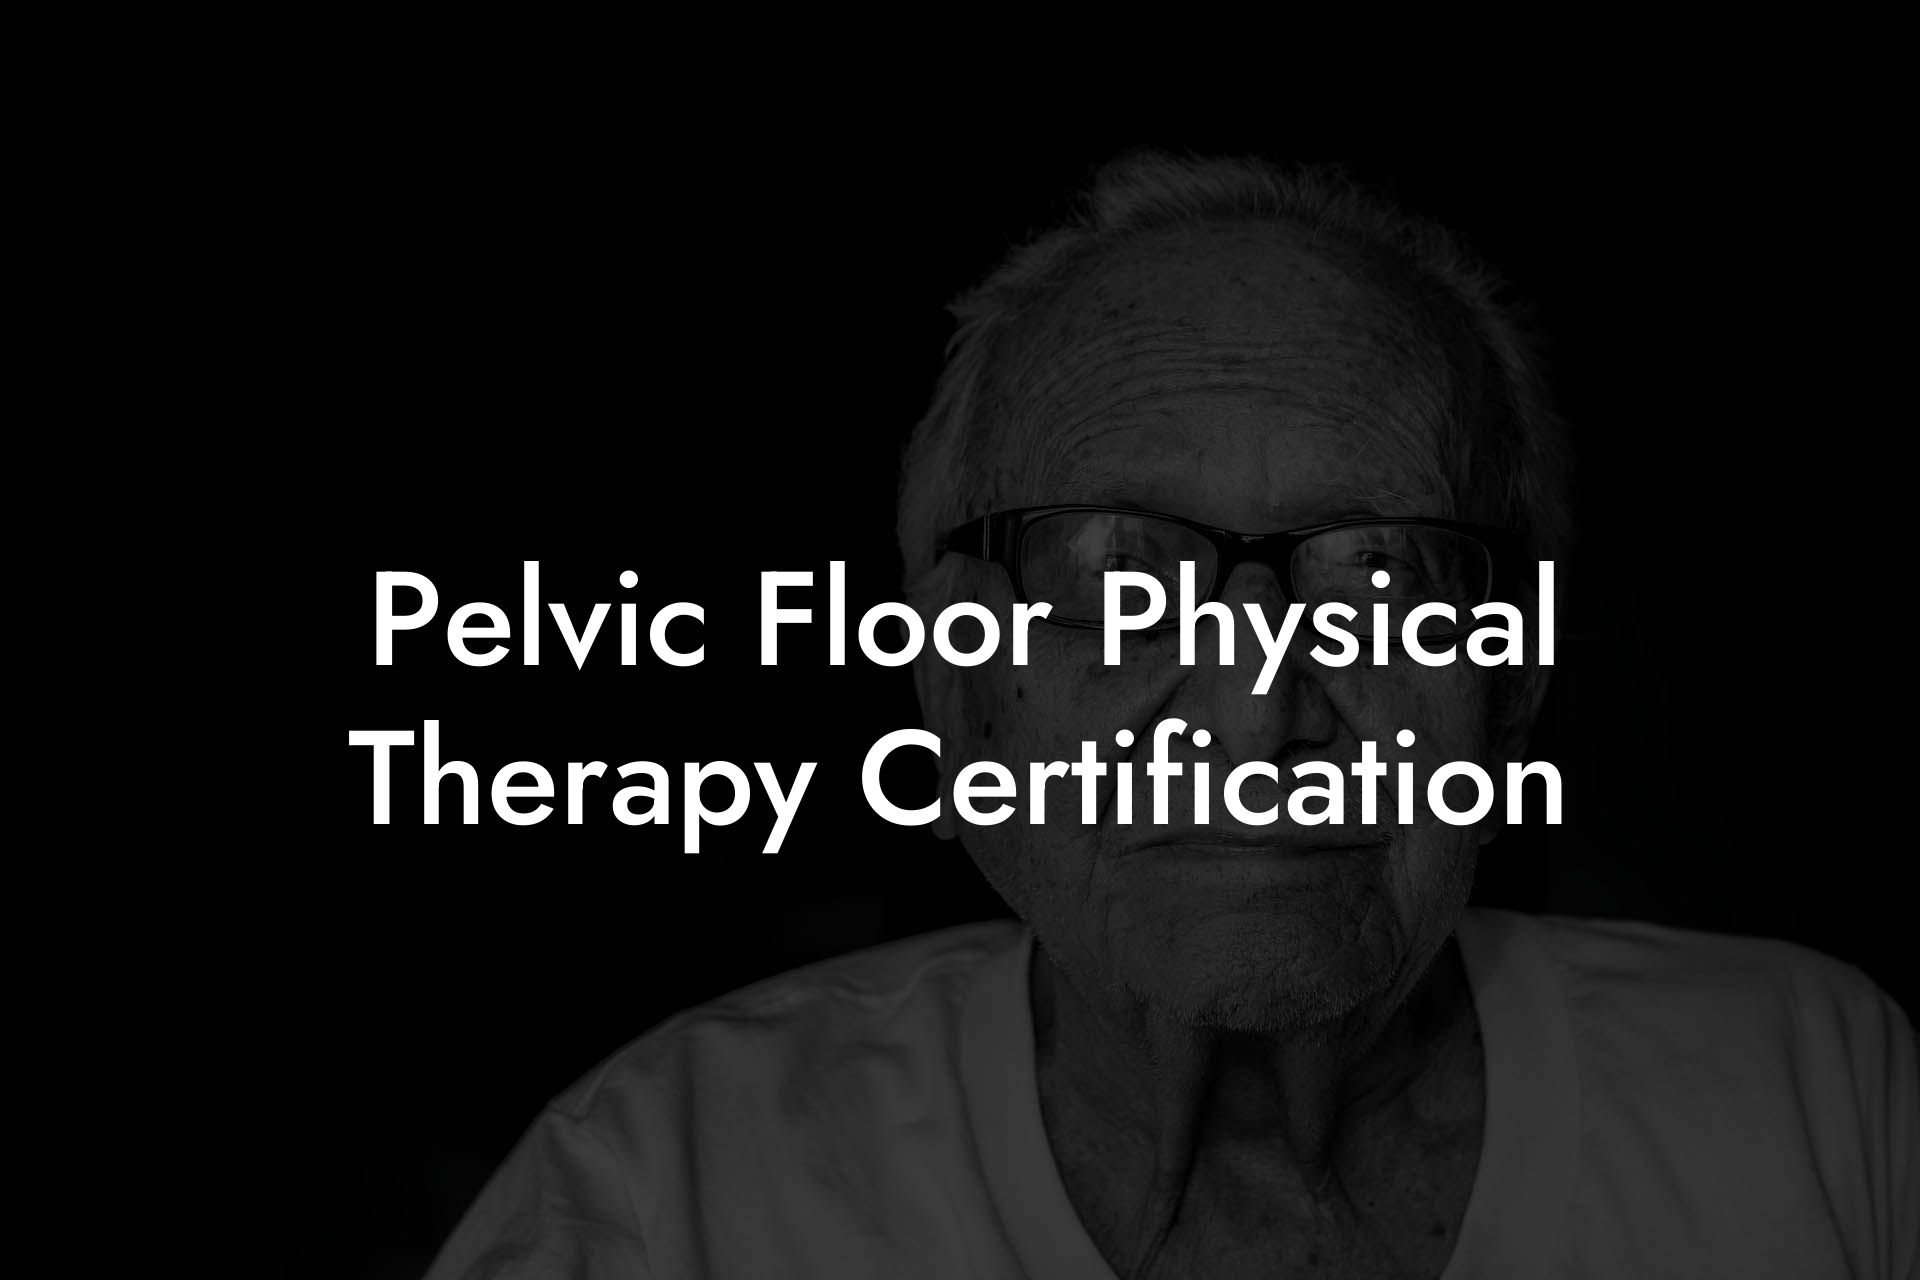 Pelvic Floor Physical Therapy Certification